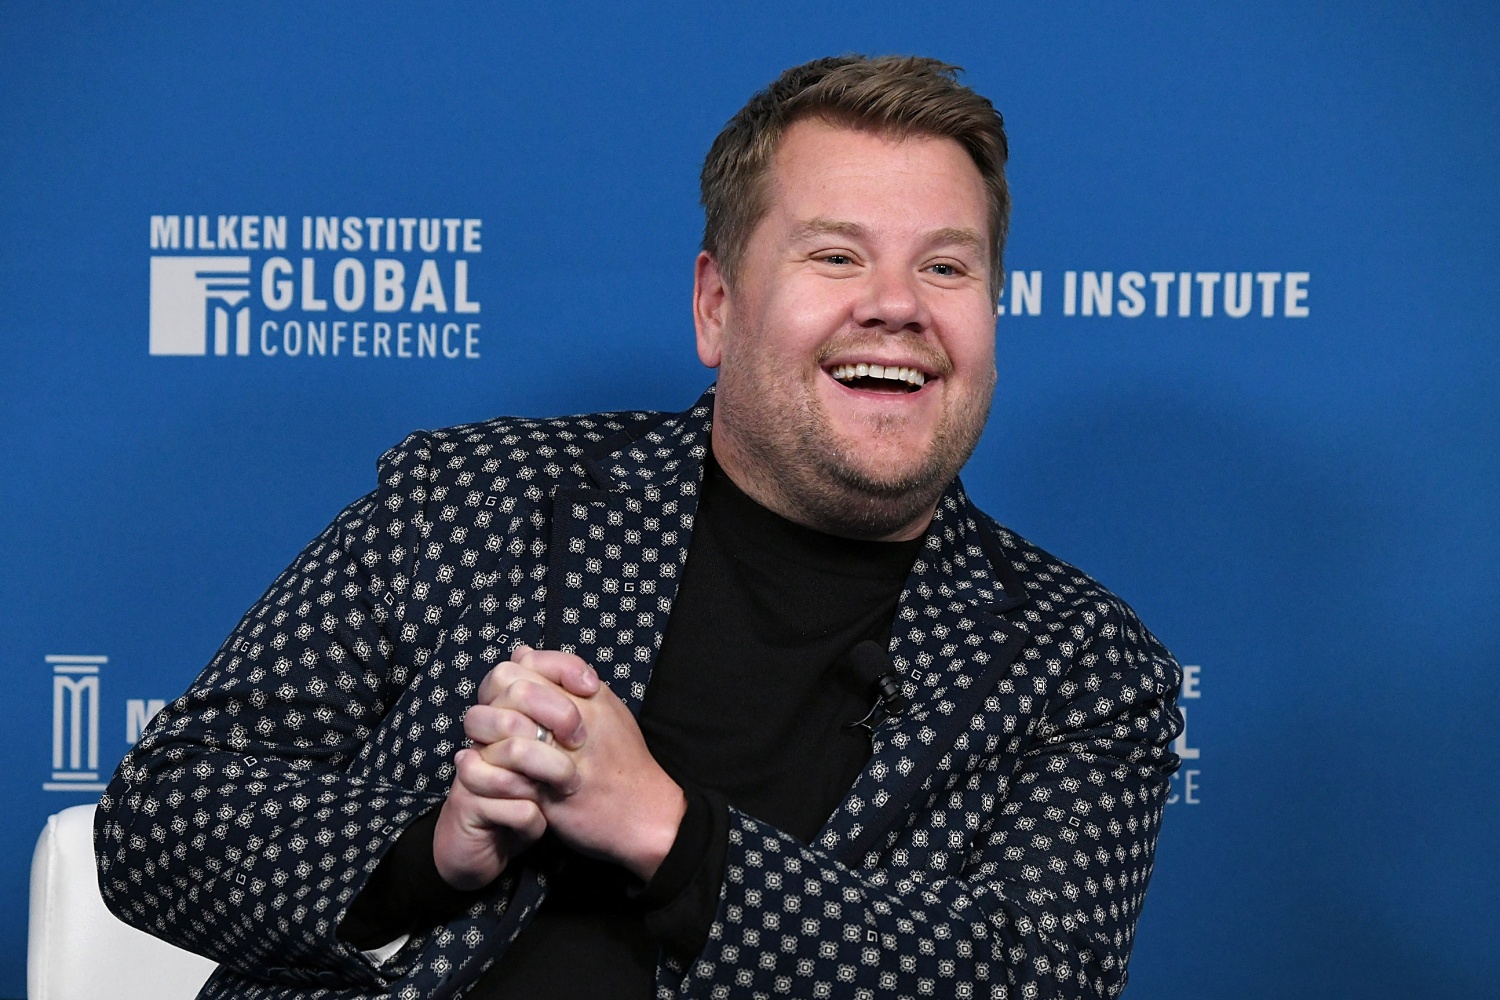 James Corden, Host, The Late Late Show, participates in a panel discussion during the annual Milken Institute Global Conference at The Beverly Hilton Hotel on April 30, 2019 in Beverly Hills, California. (Photo by Michael Kovac/Getty Images)